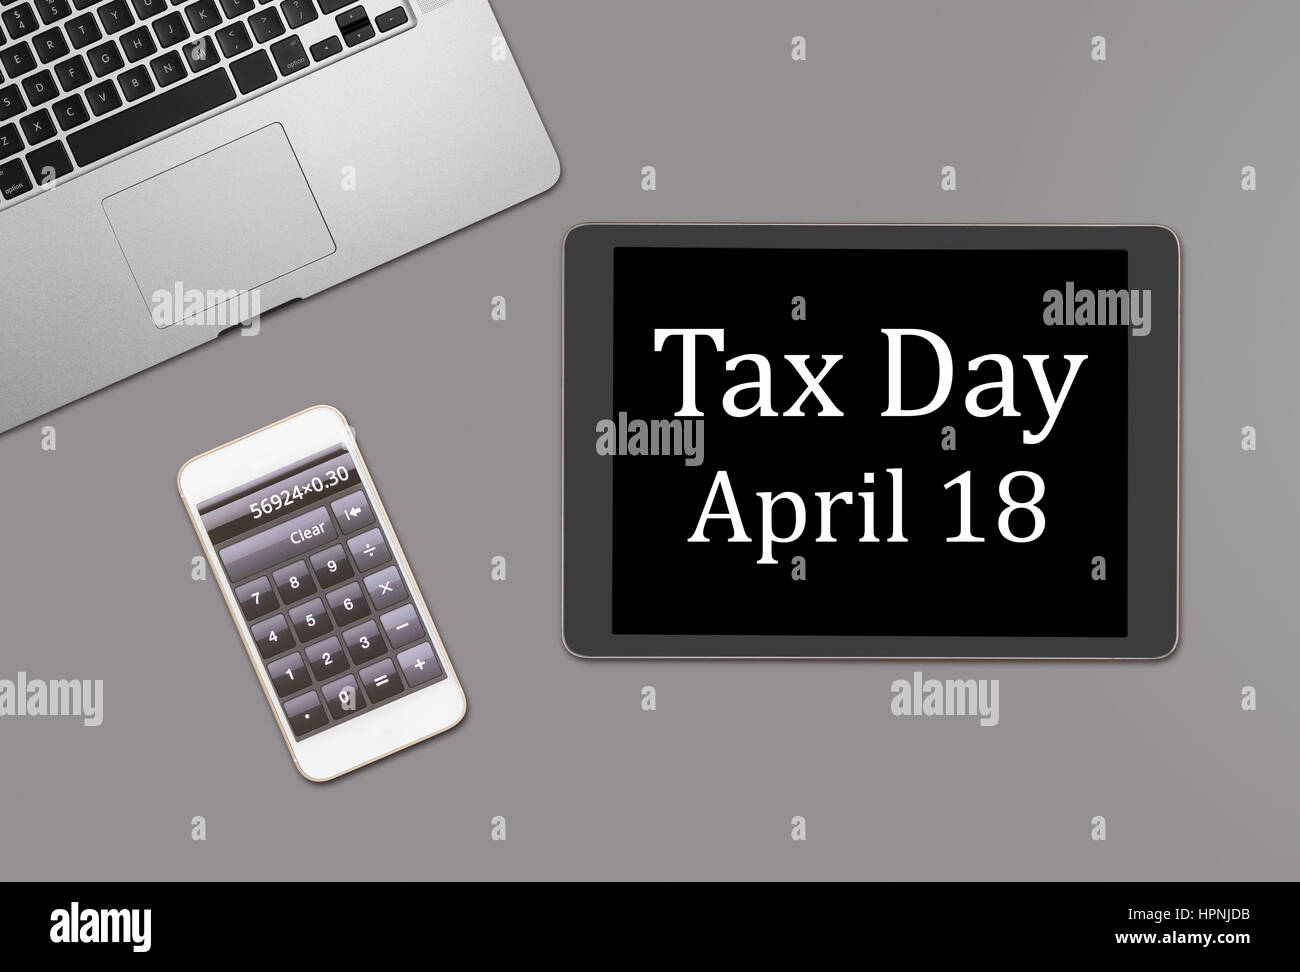 Overhead clean desk for laptop, smartphone and tablet computer with message for tax day 2017 as April 18 Stock Photo